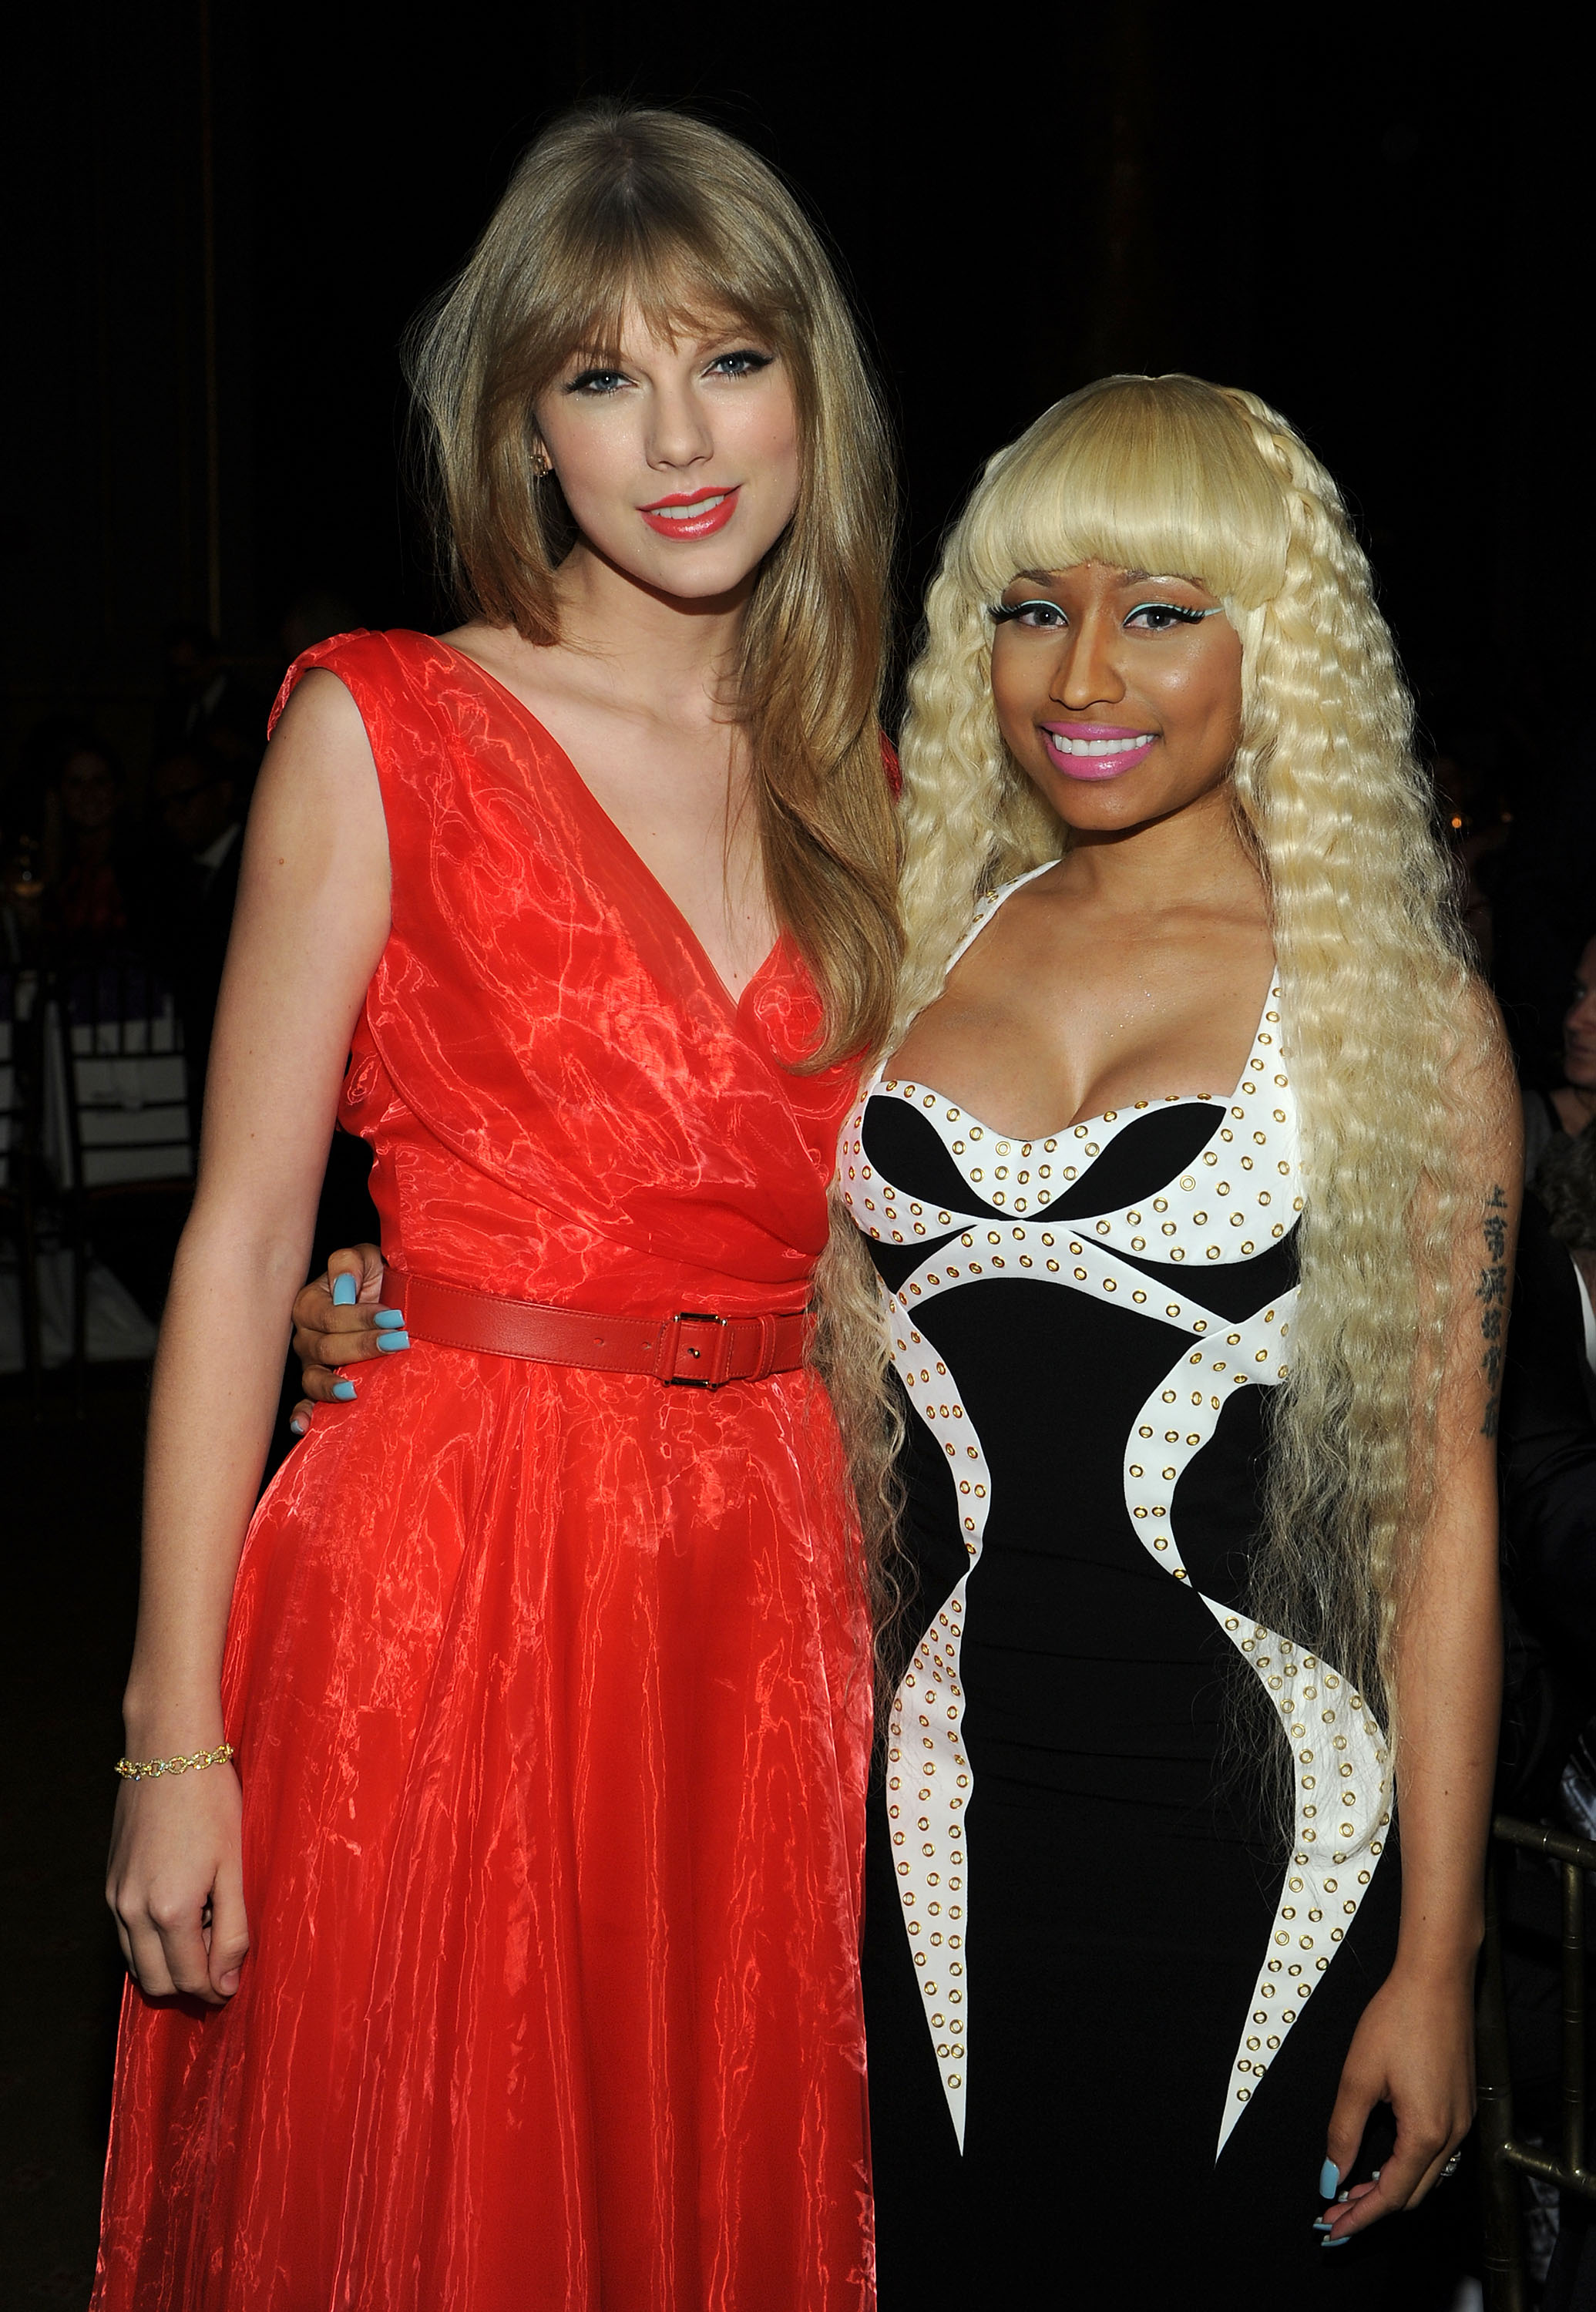 Taylor Swift (left) and Nicki Minaj, in happier times. Specifically, 2011.